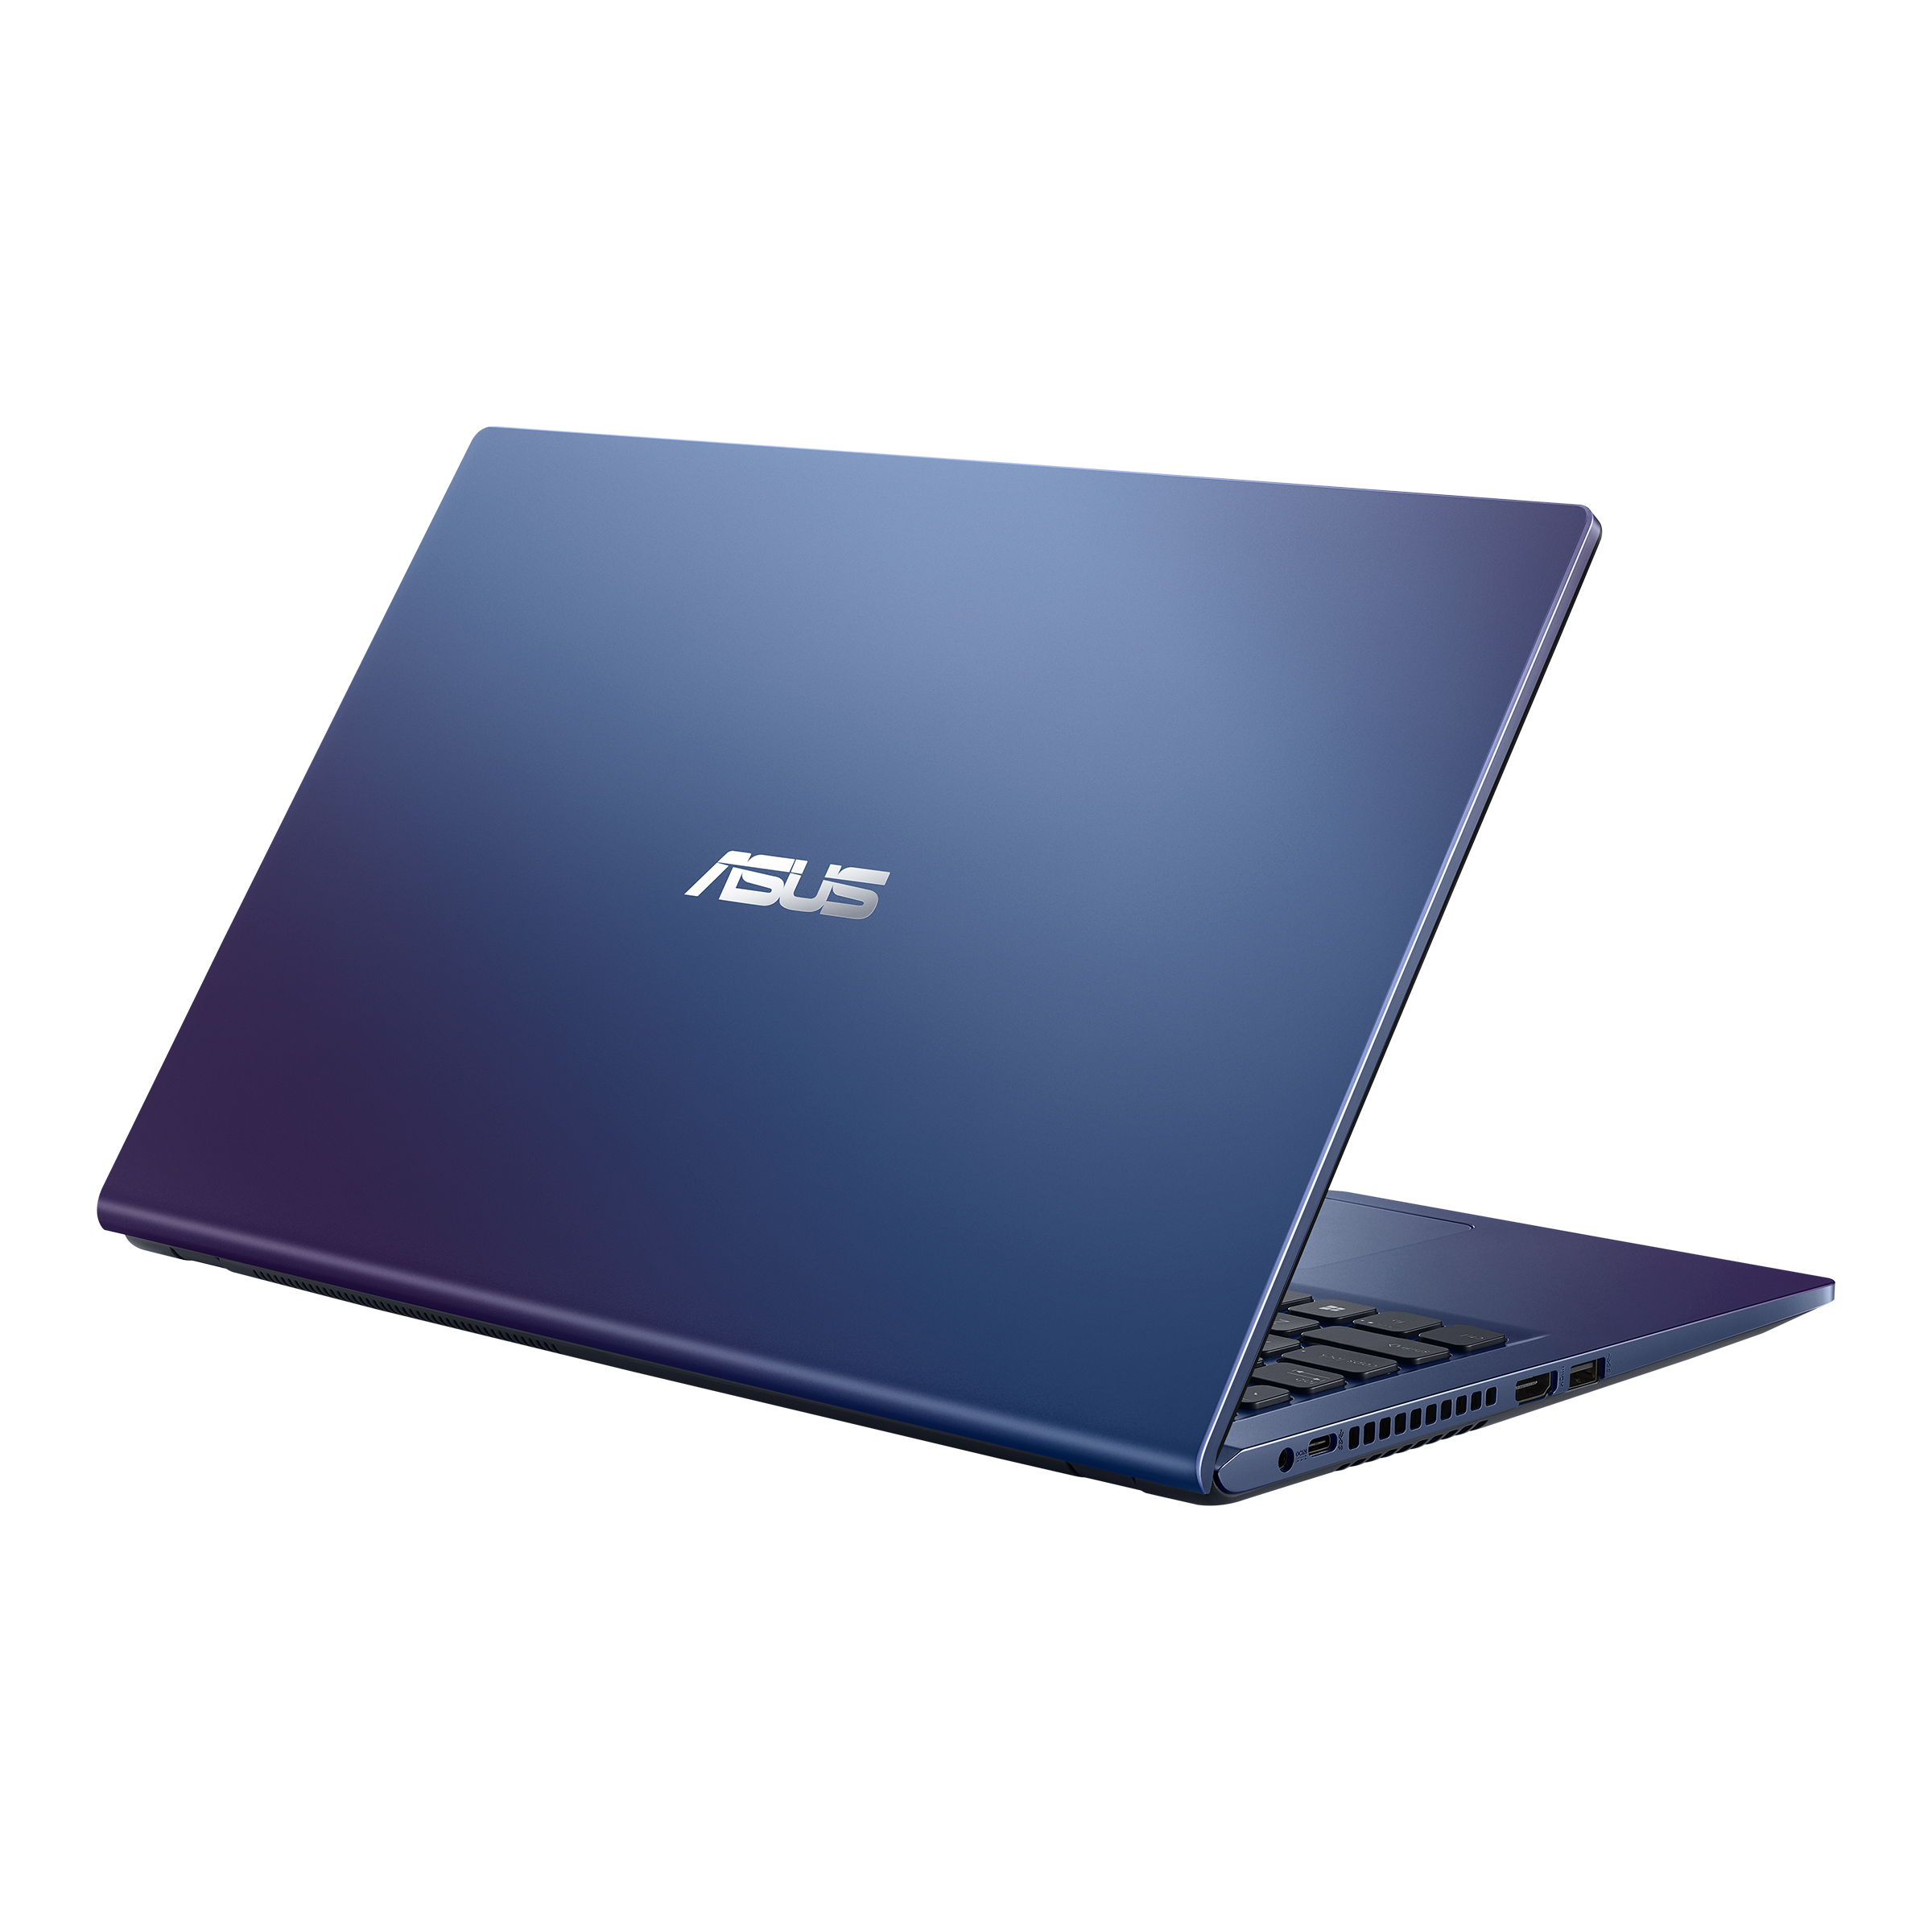 ASUS M515 (AMD Ryzen 5000 Series)｜Laptops Home｜ASUS USA For